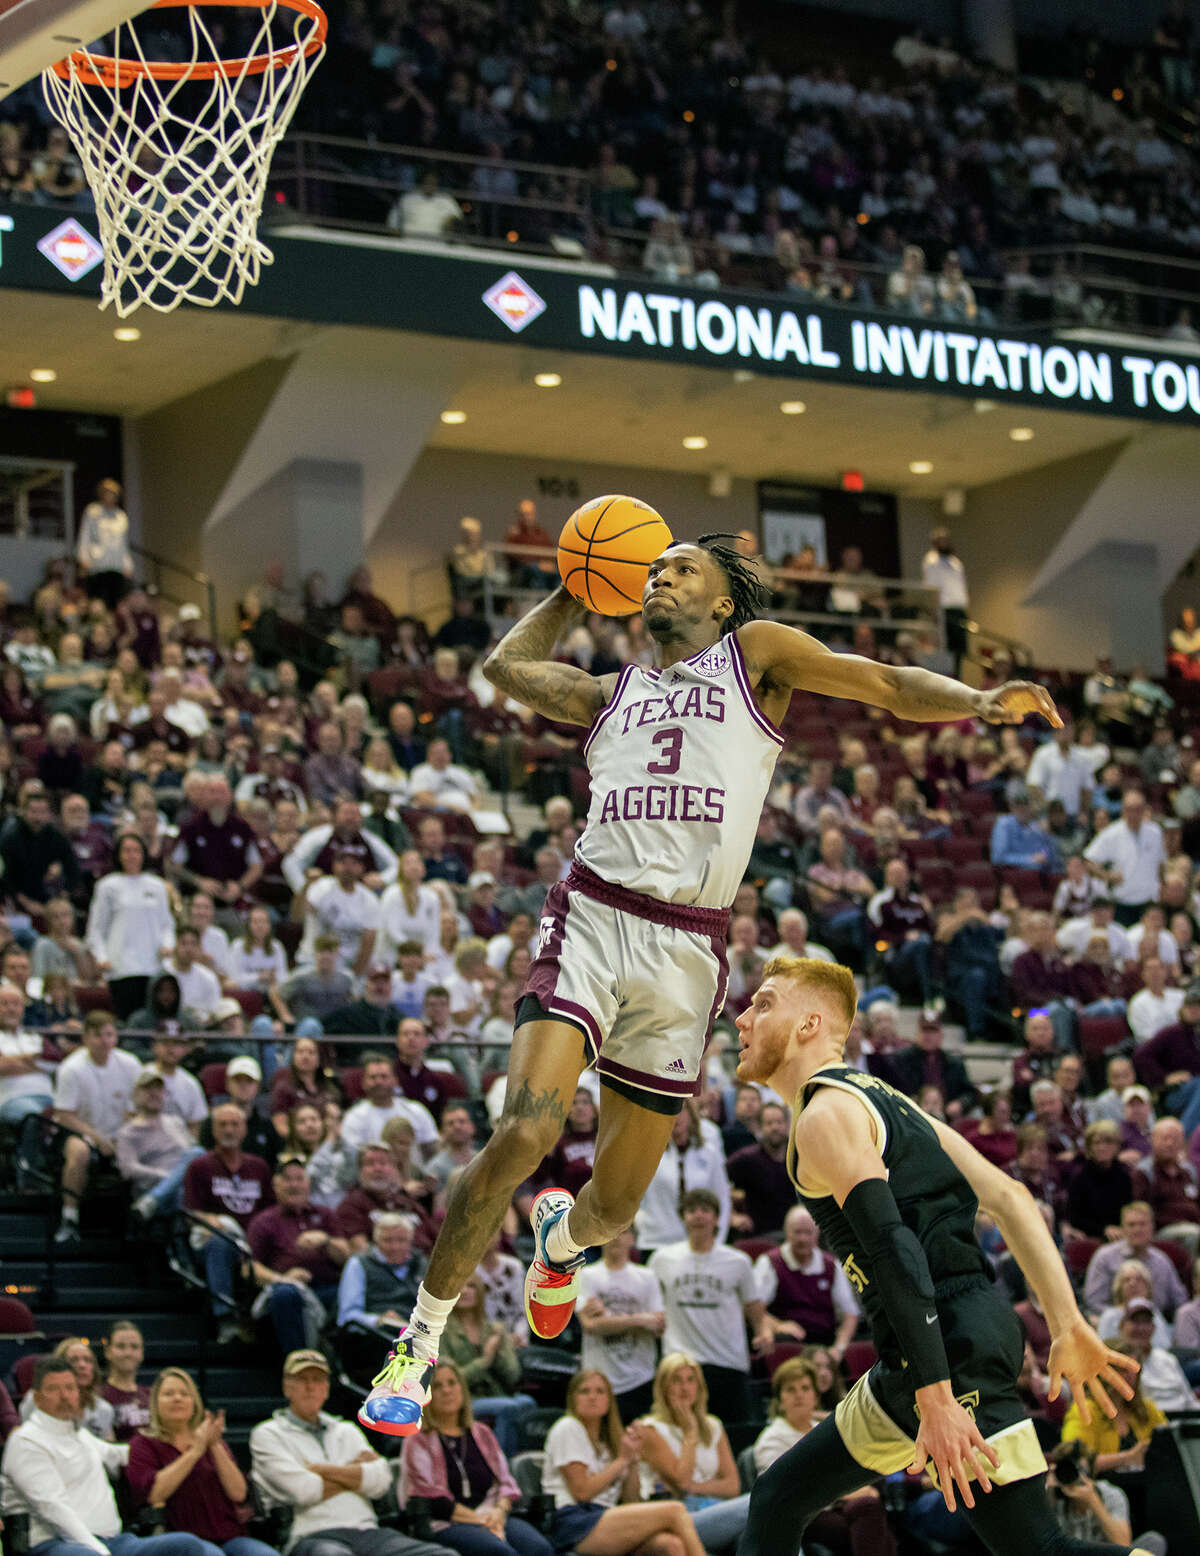 Texas A&M's Quenton Jackson (3) flies through the air for a dunk over Wake Forest's Cameron Hildreth during the first half of an NCAA college basketball game in the third round of the NIT in College Station, Texas, Wednesday, March 23, 2022. (Michael Miller/College Station Eagle via AP)